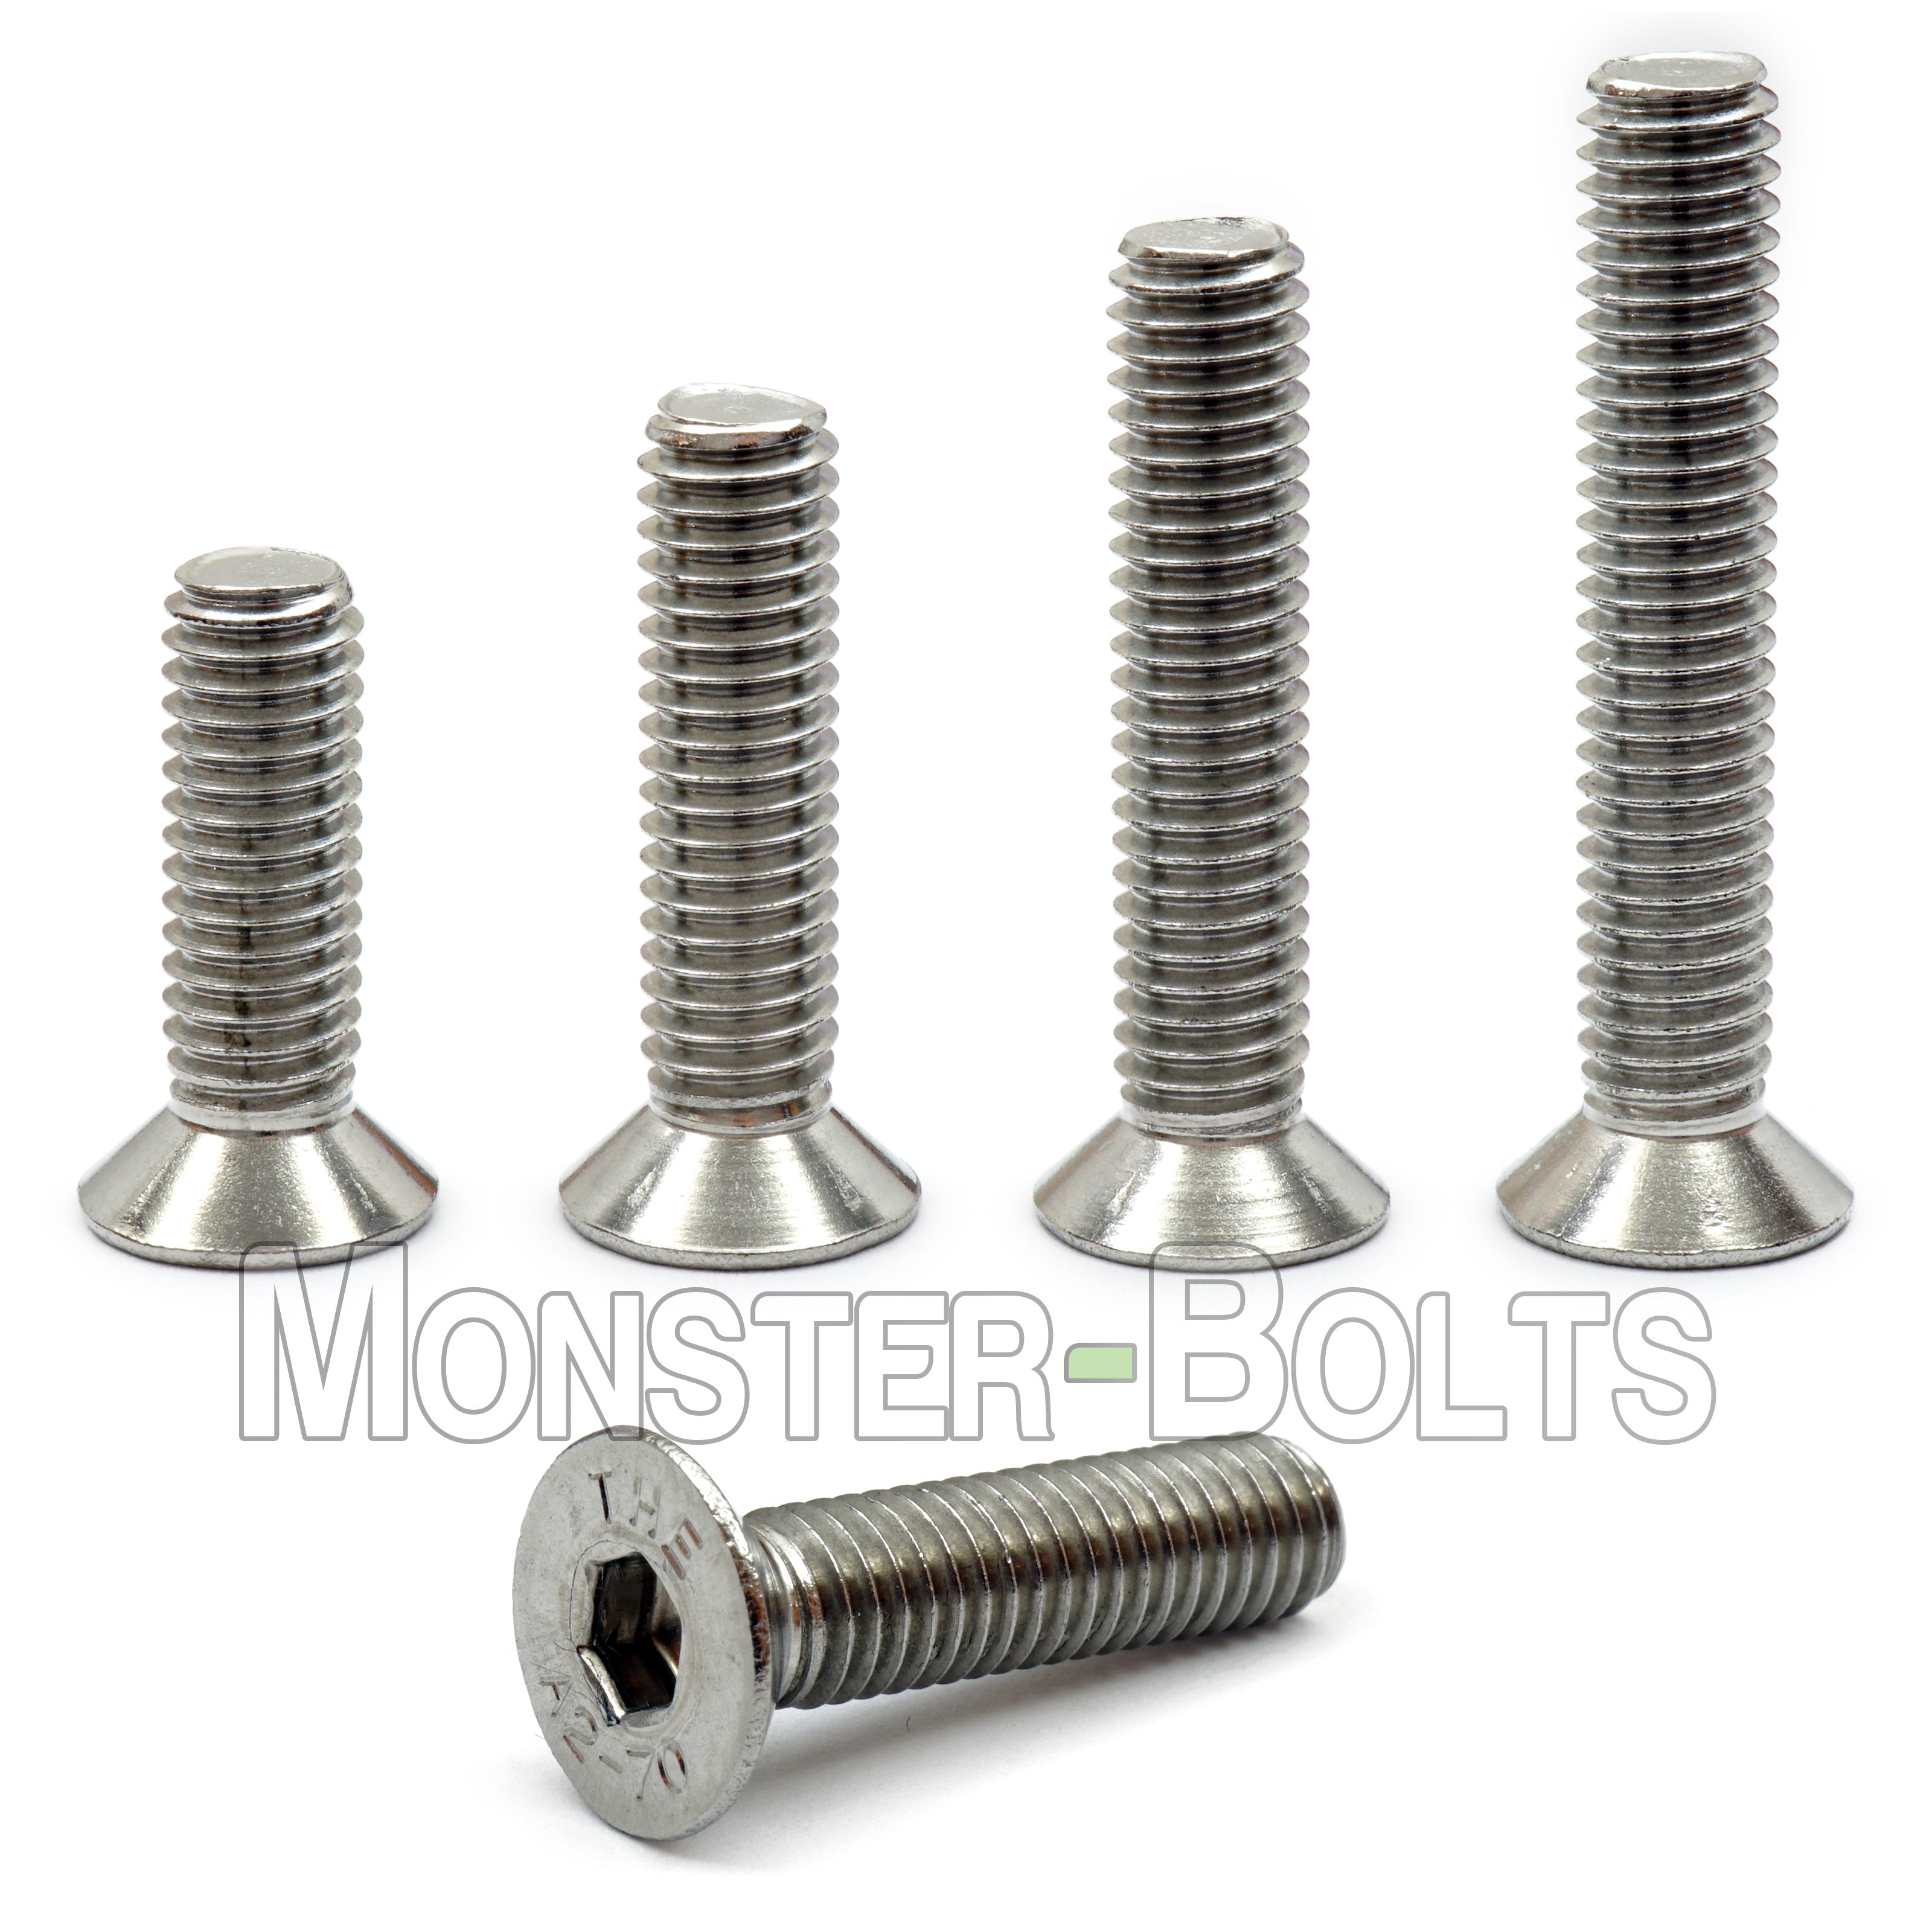 6mm Details about   M6 A2 STAINLESS COACH SCREW HEX HEXAGON HEAD WOOD SCREWS LAG BOLT STEEL CE